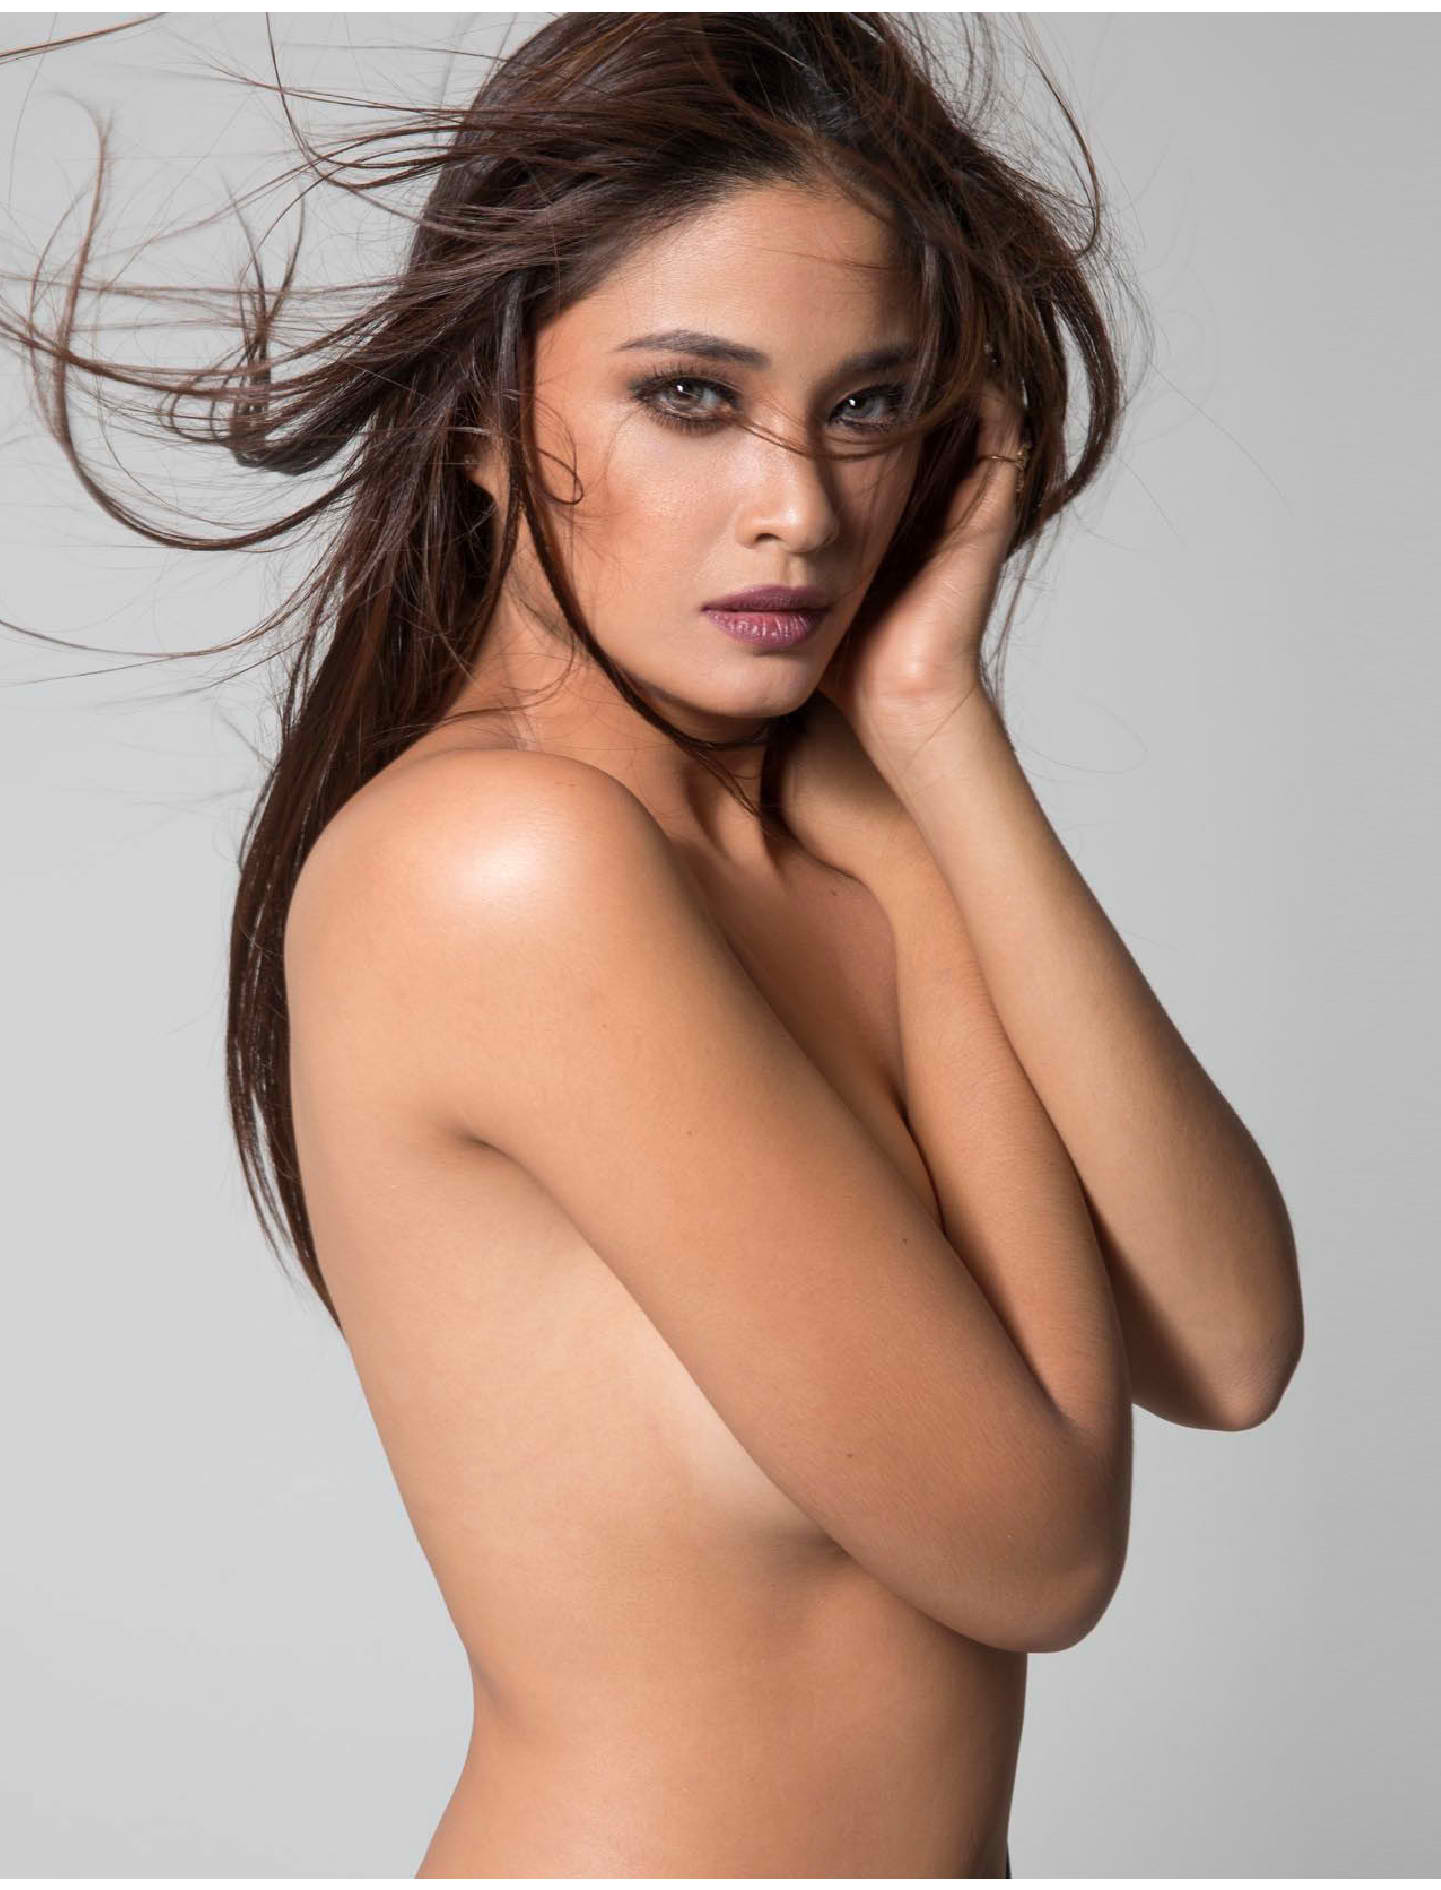 Naked Yam Concepcion Added 07 19 2016 By Hot Kat